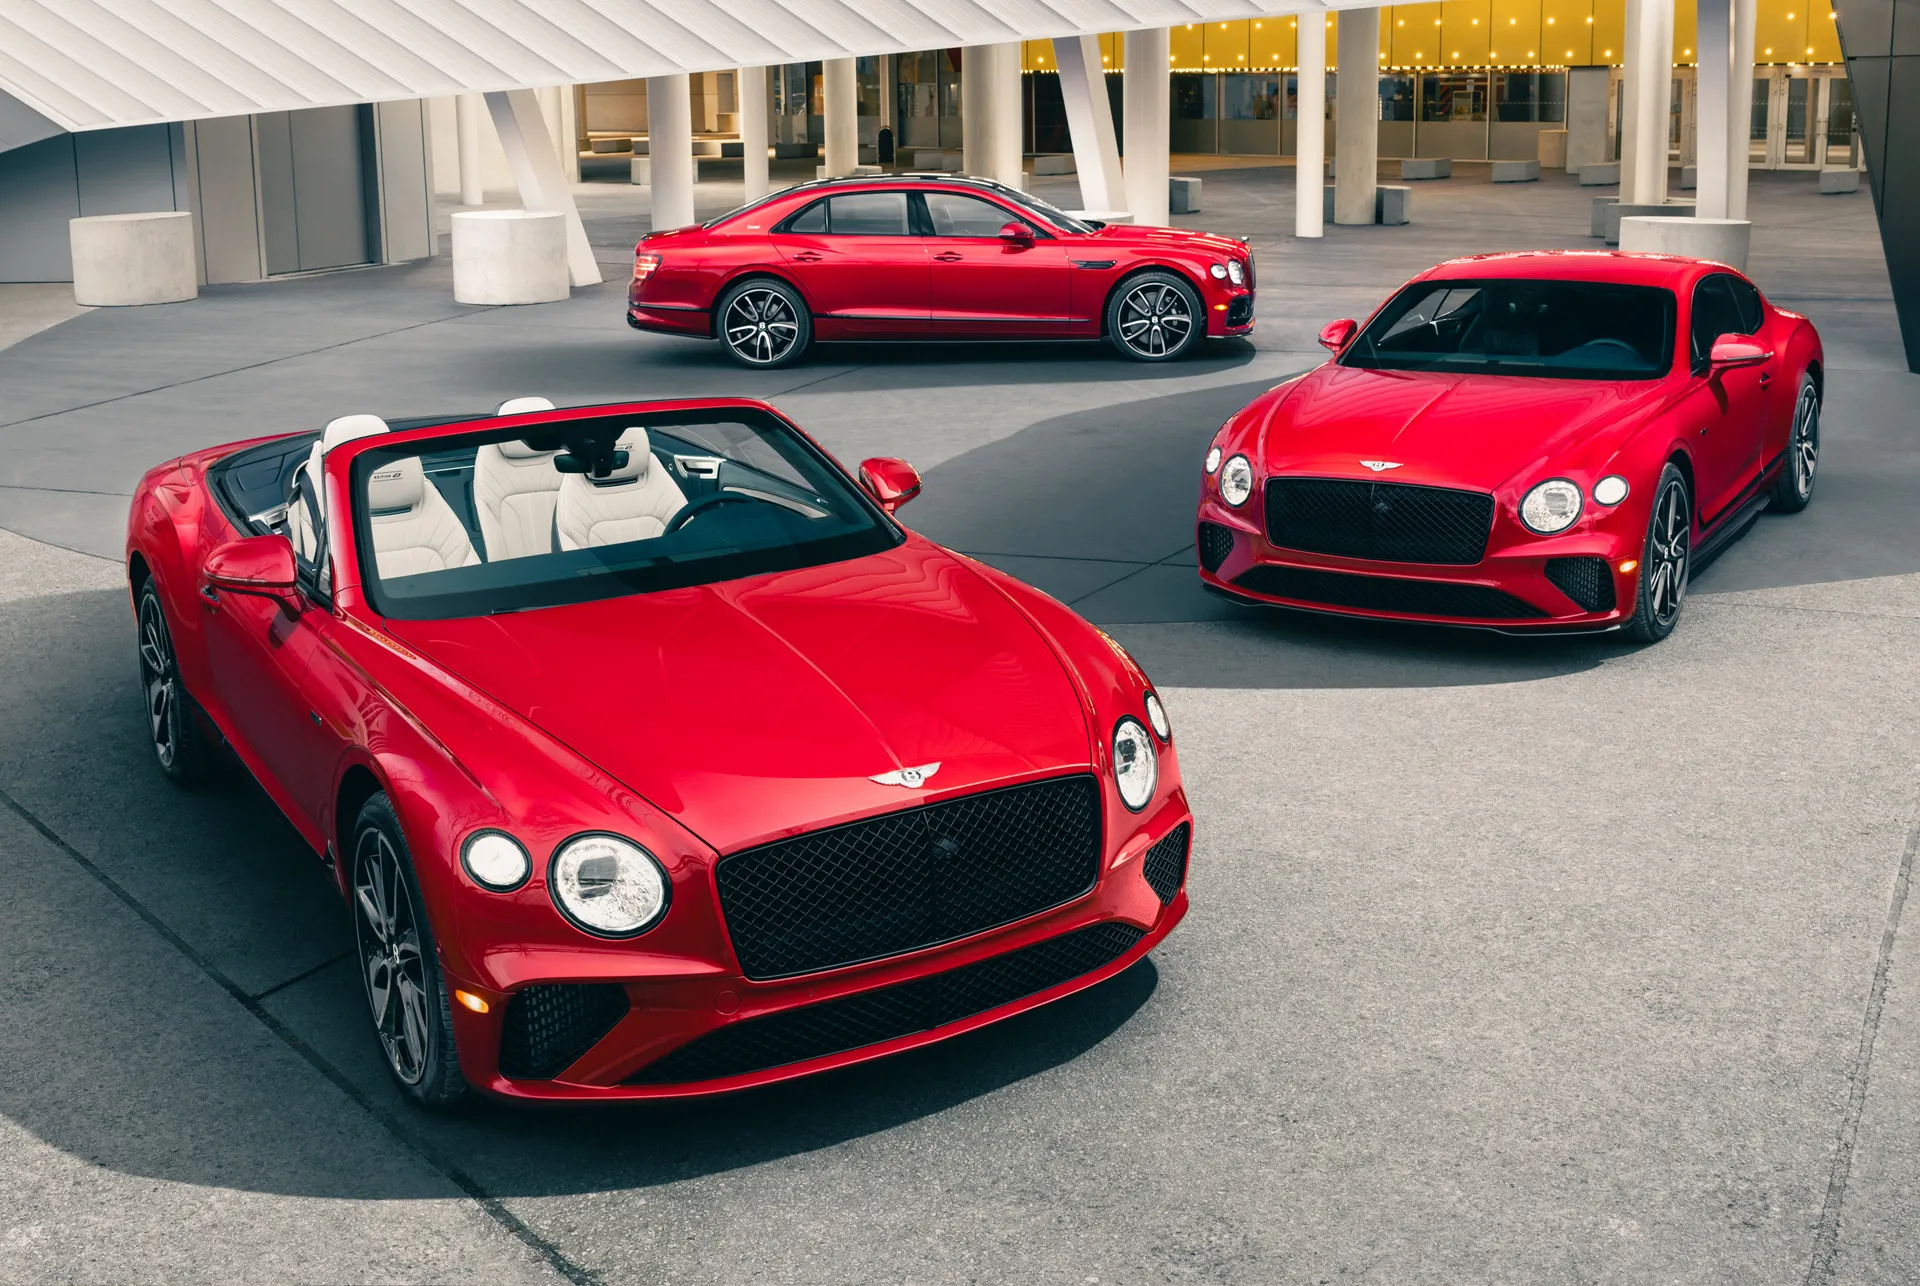 Bentley Edition 8 collection bids farewell to pure V-8 power